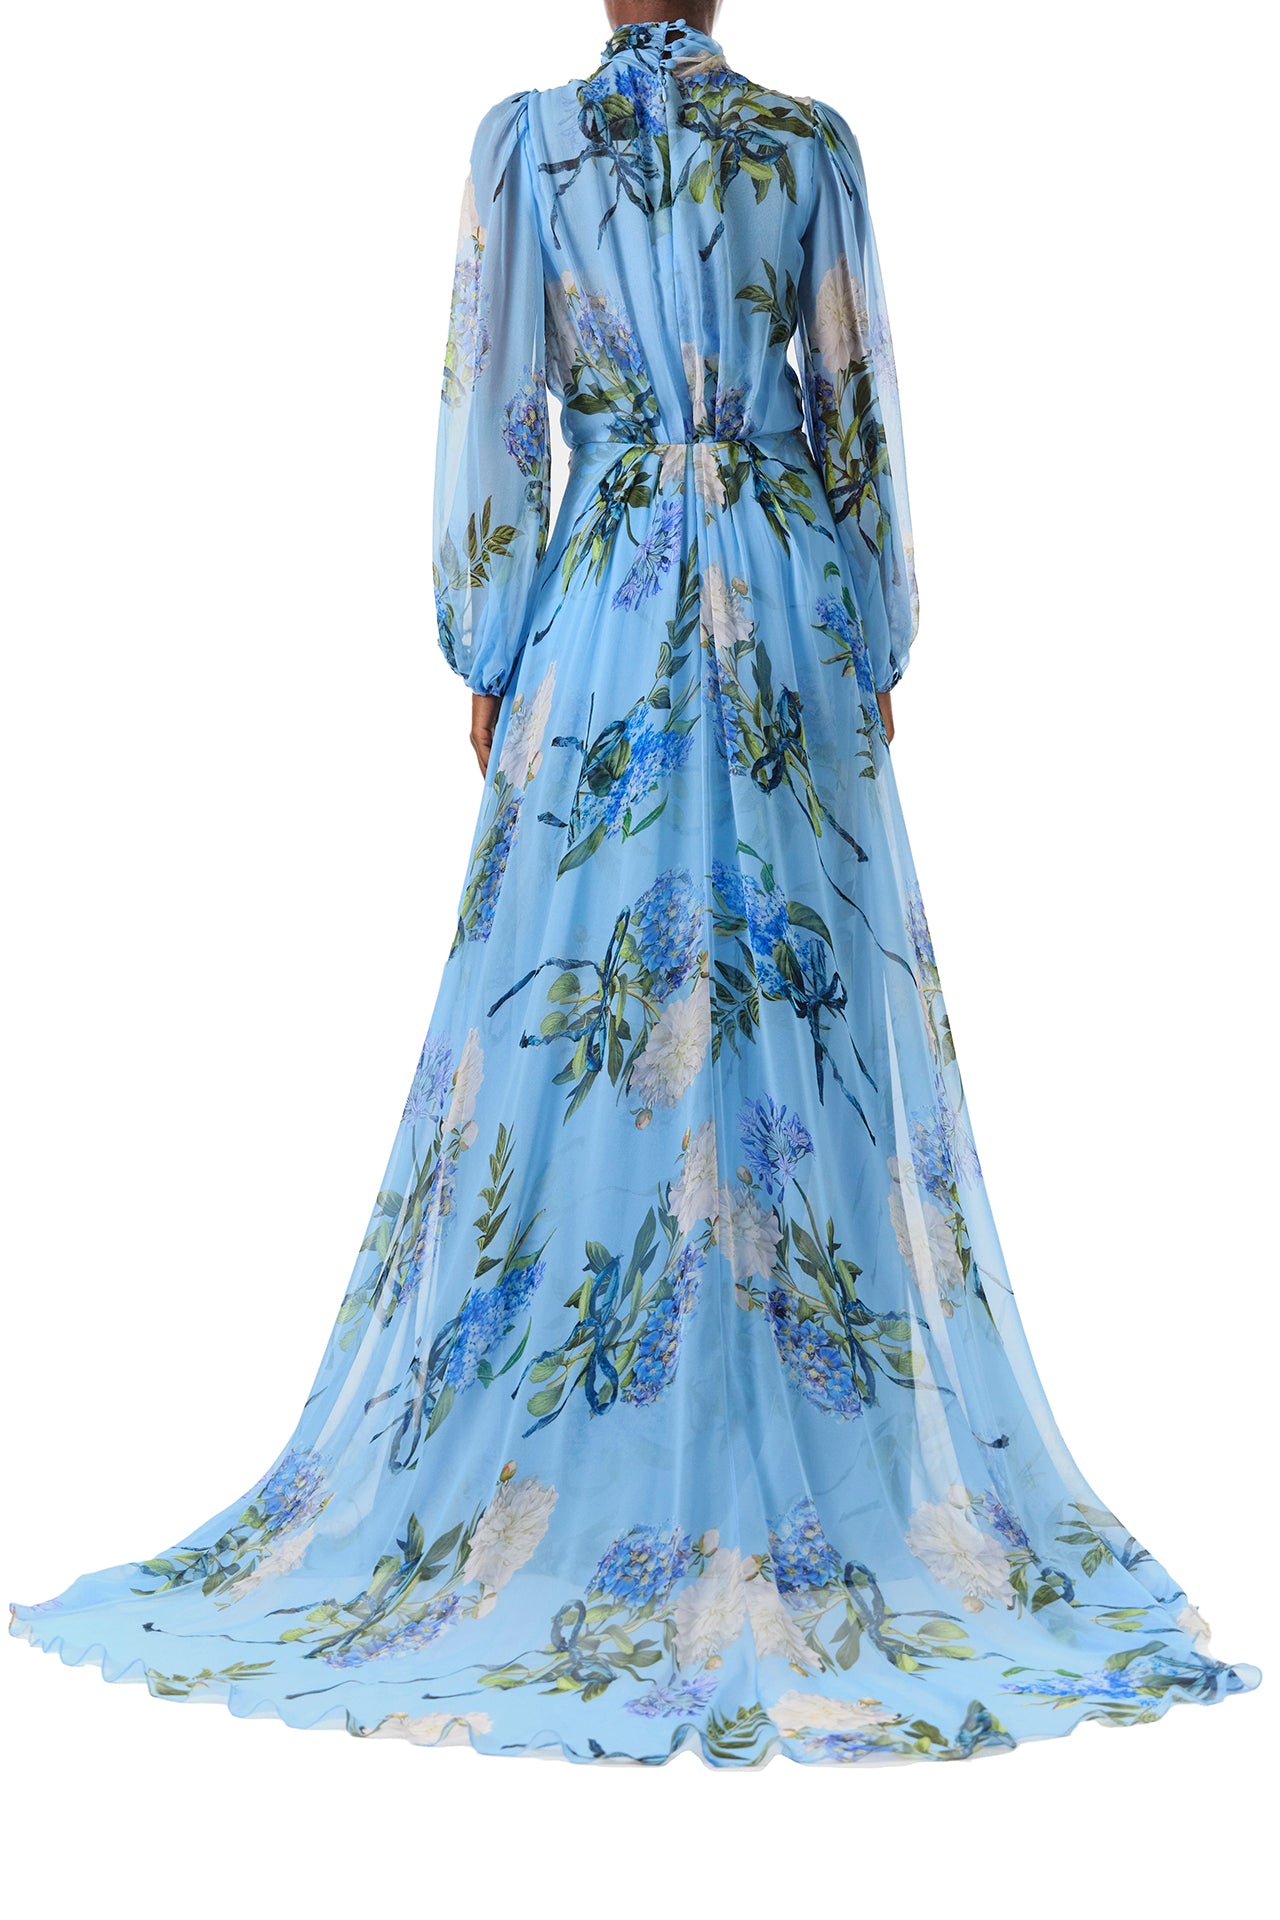 Monique Lhuillier Fall 2024 long sleeve gown in blue floral printed chiffon with self-tie neckline - back.